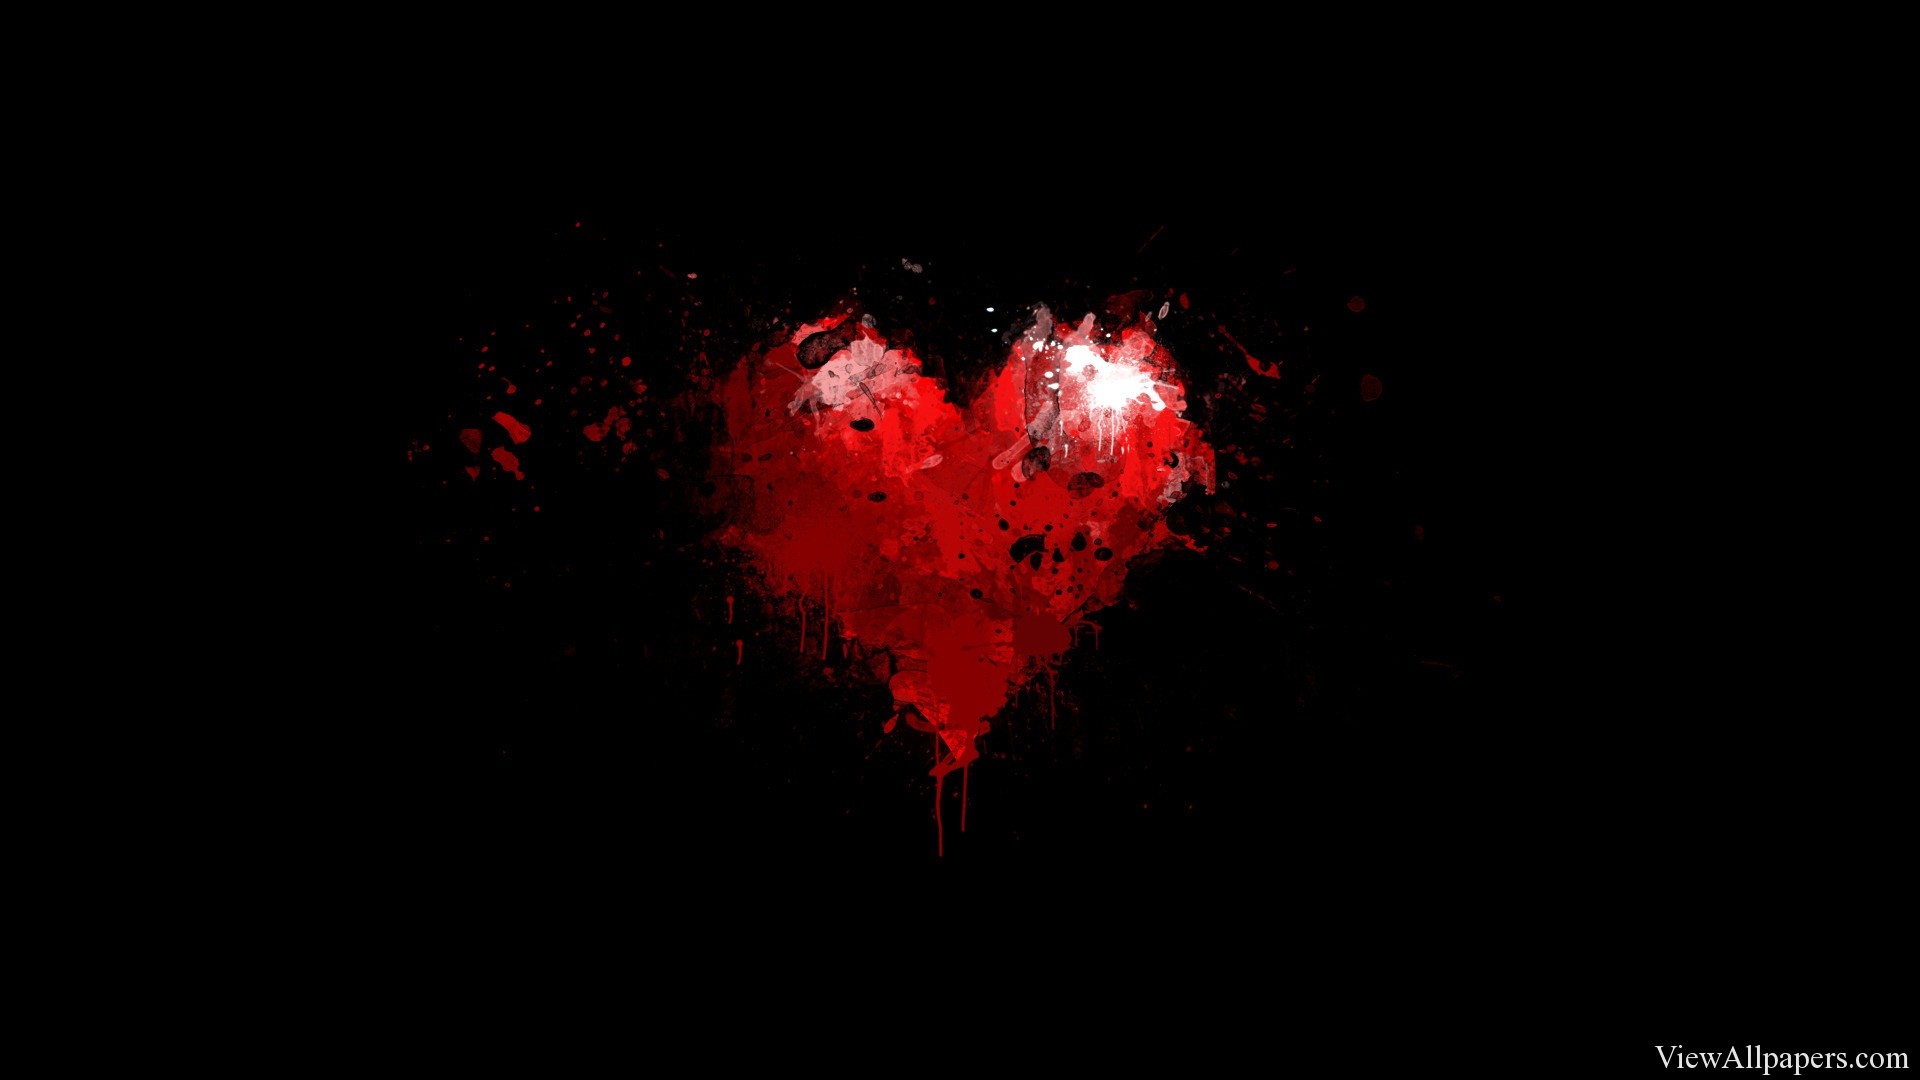 Painted Red Heart on Black Background Wallpaper